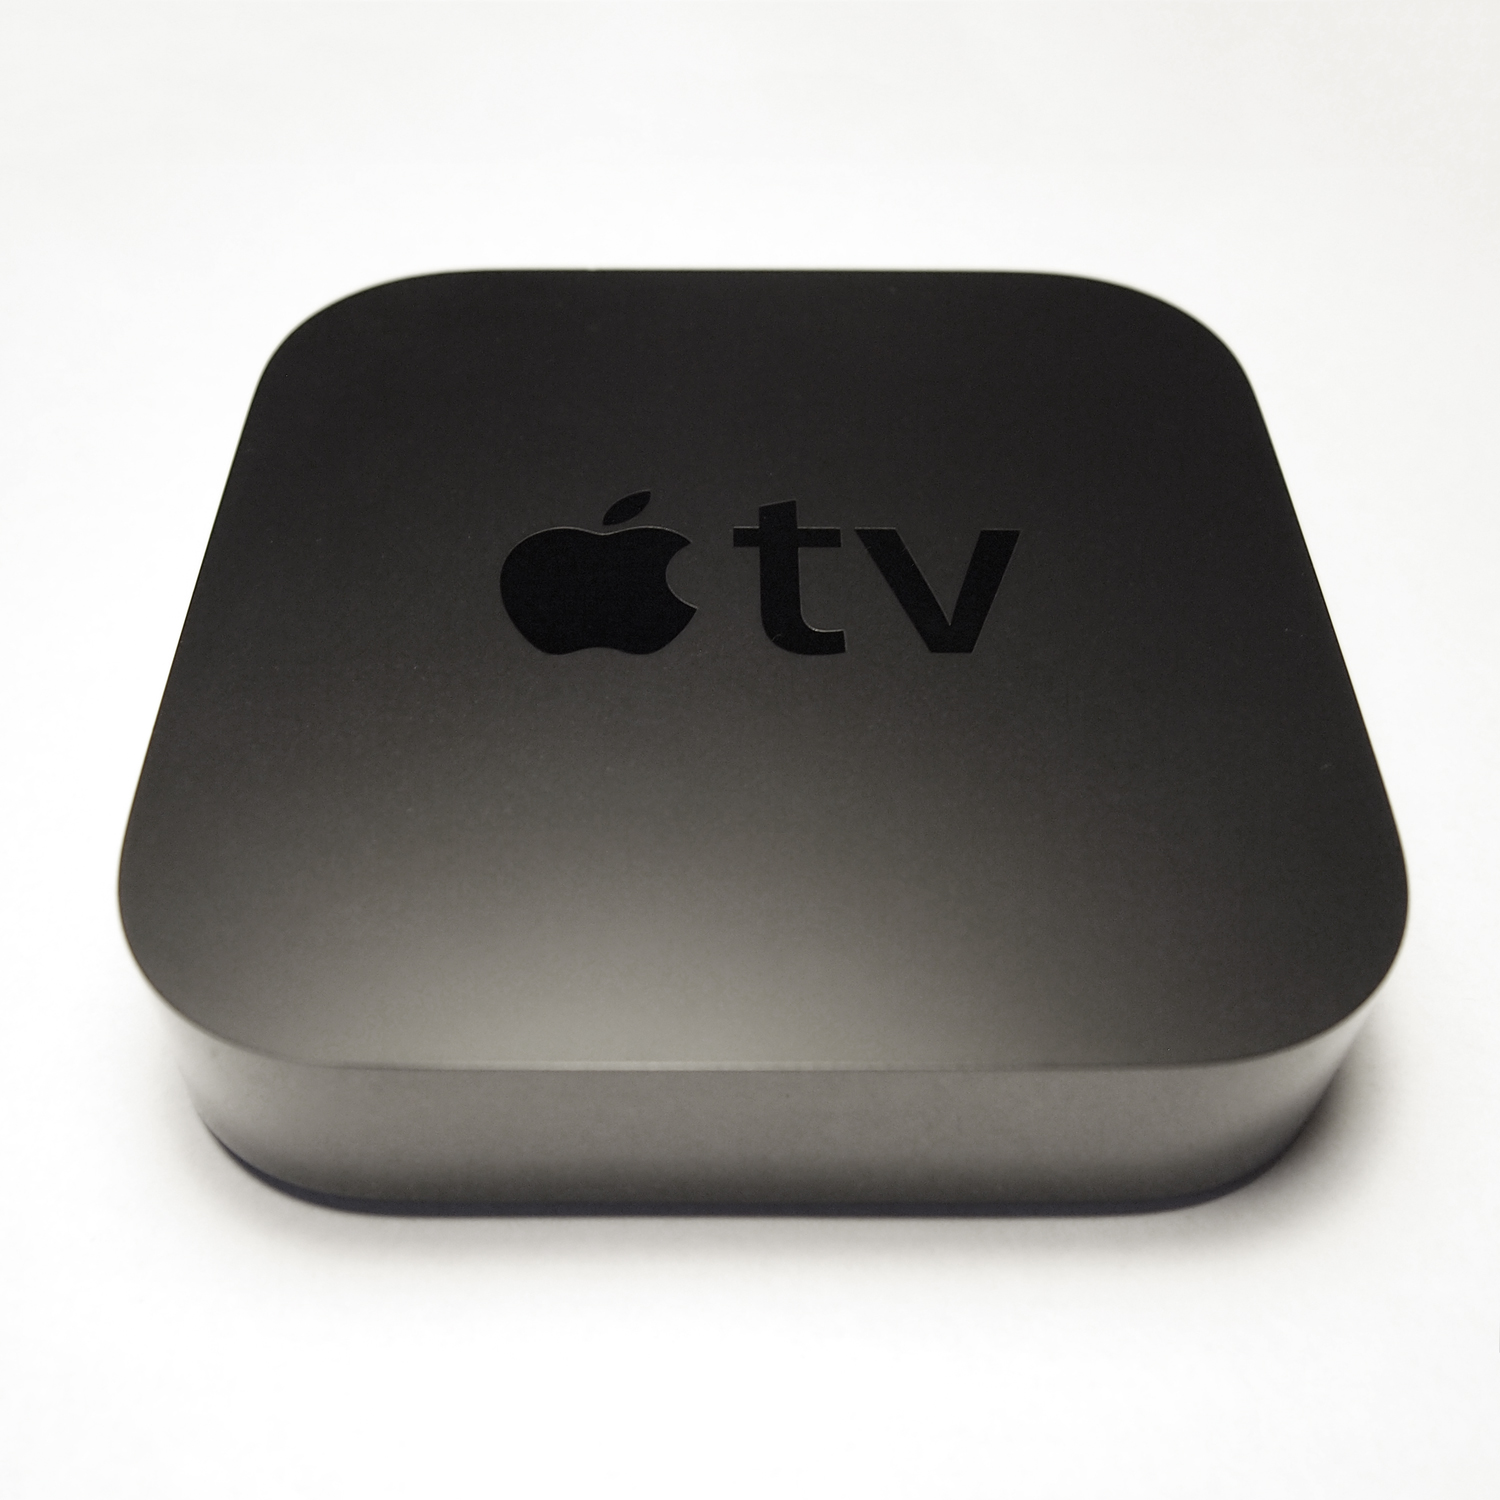 Apple Pushes CNBC, Fox Now To Apple TV